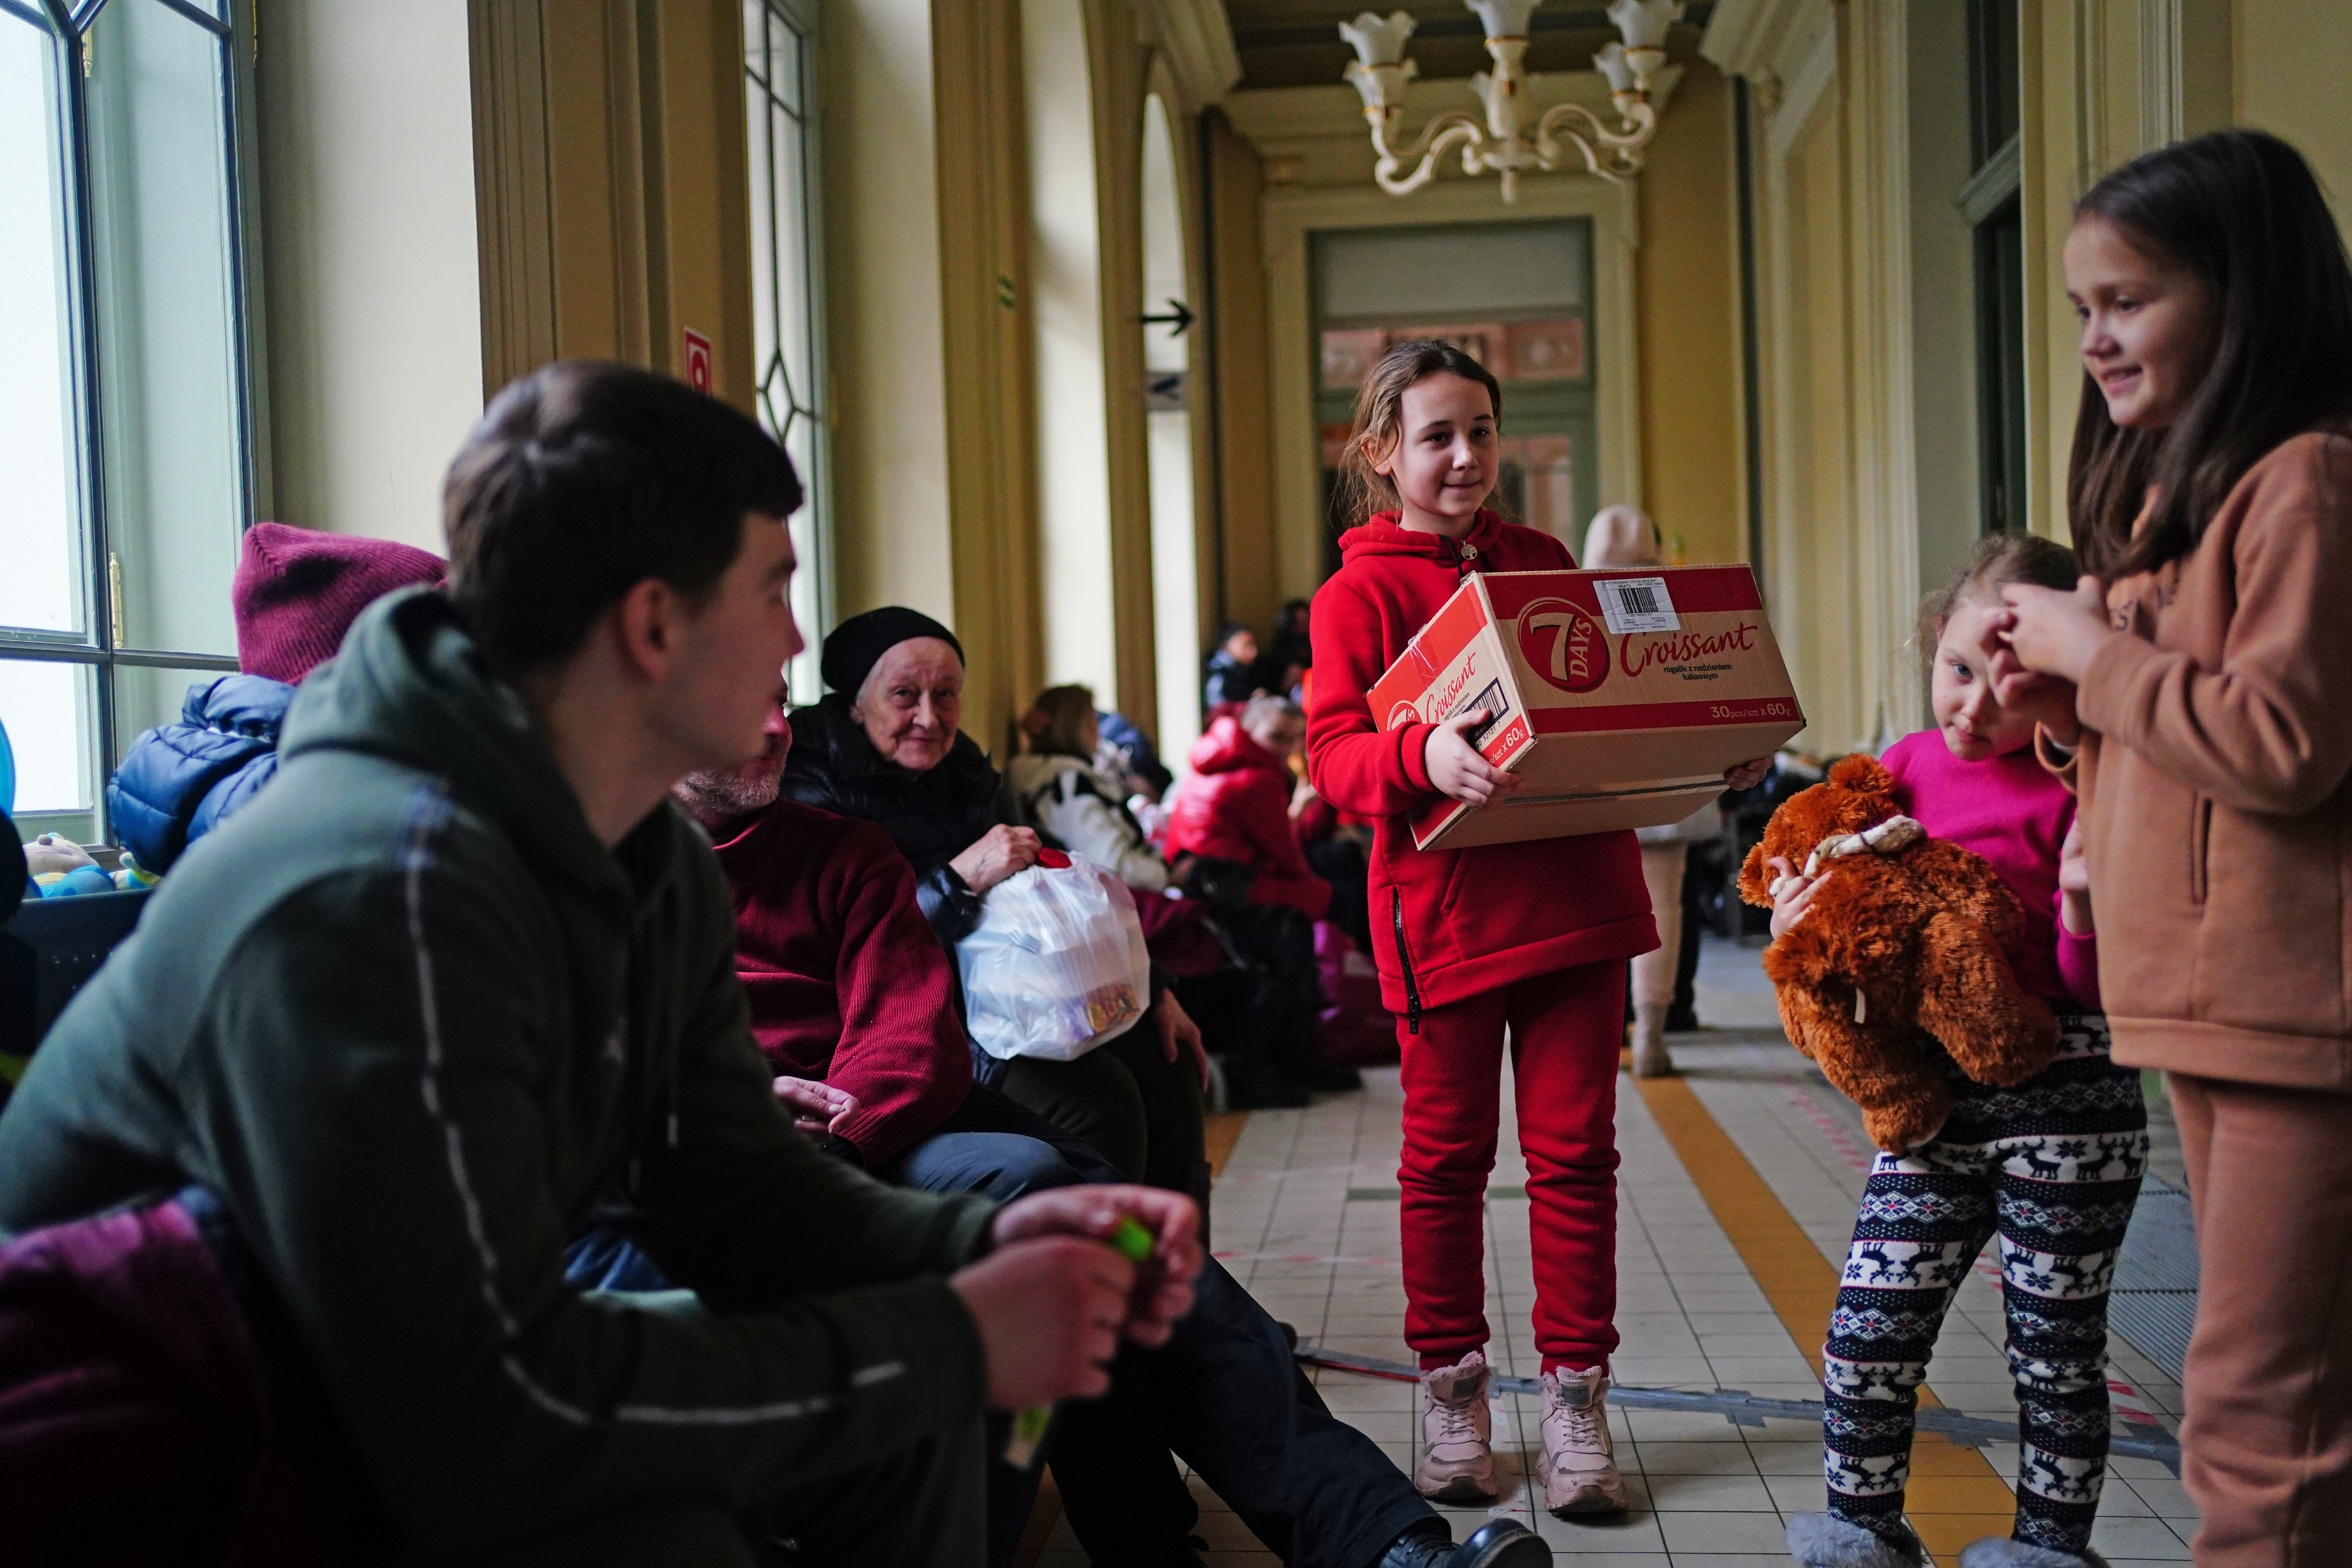 A girl from ukraine hands food to refugees at przemysl train station in poland.